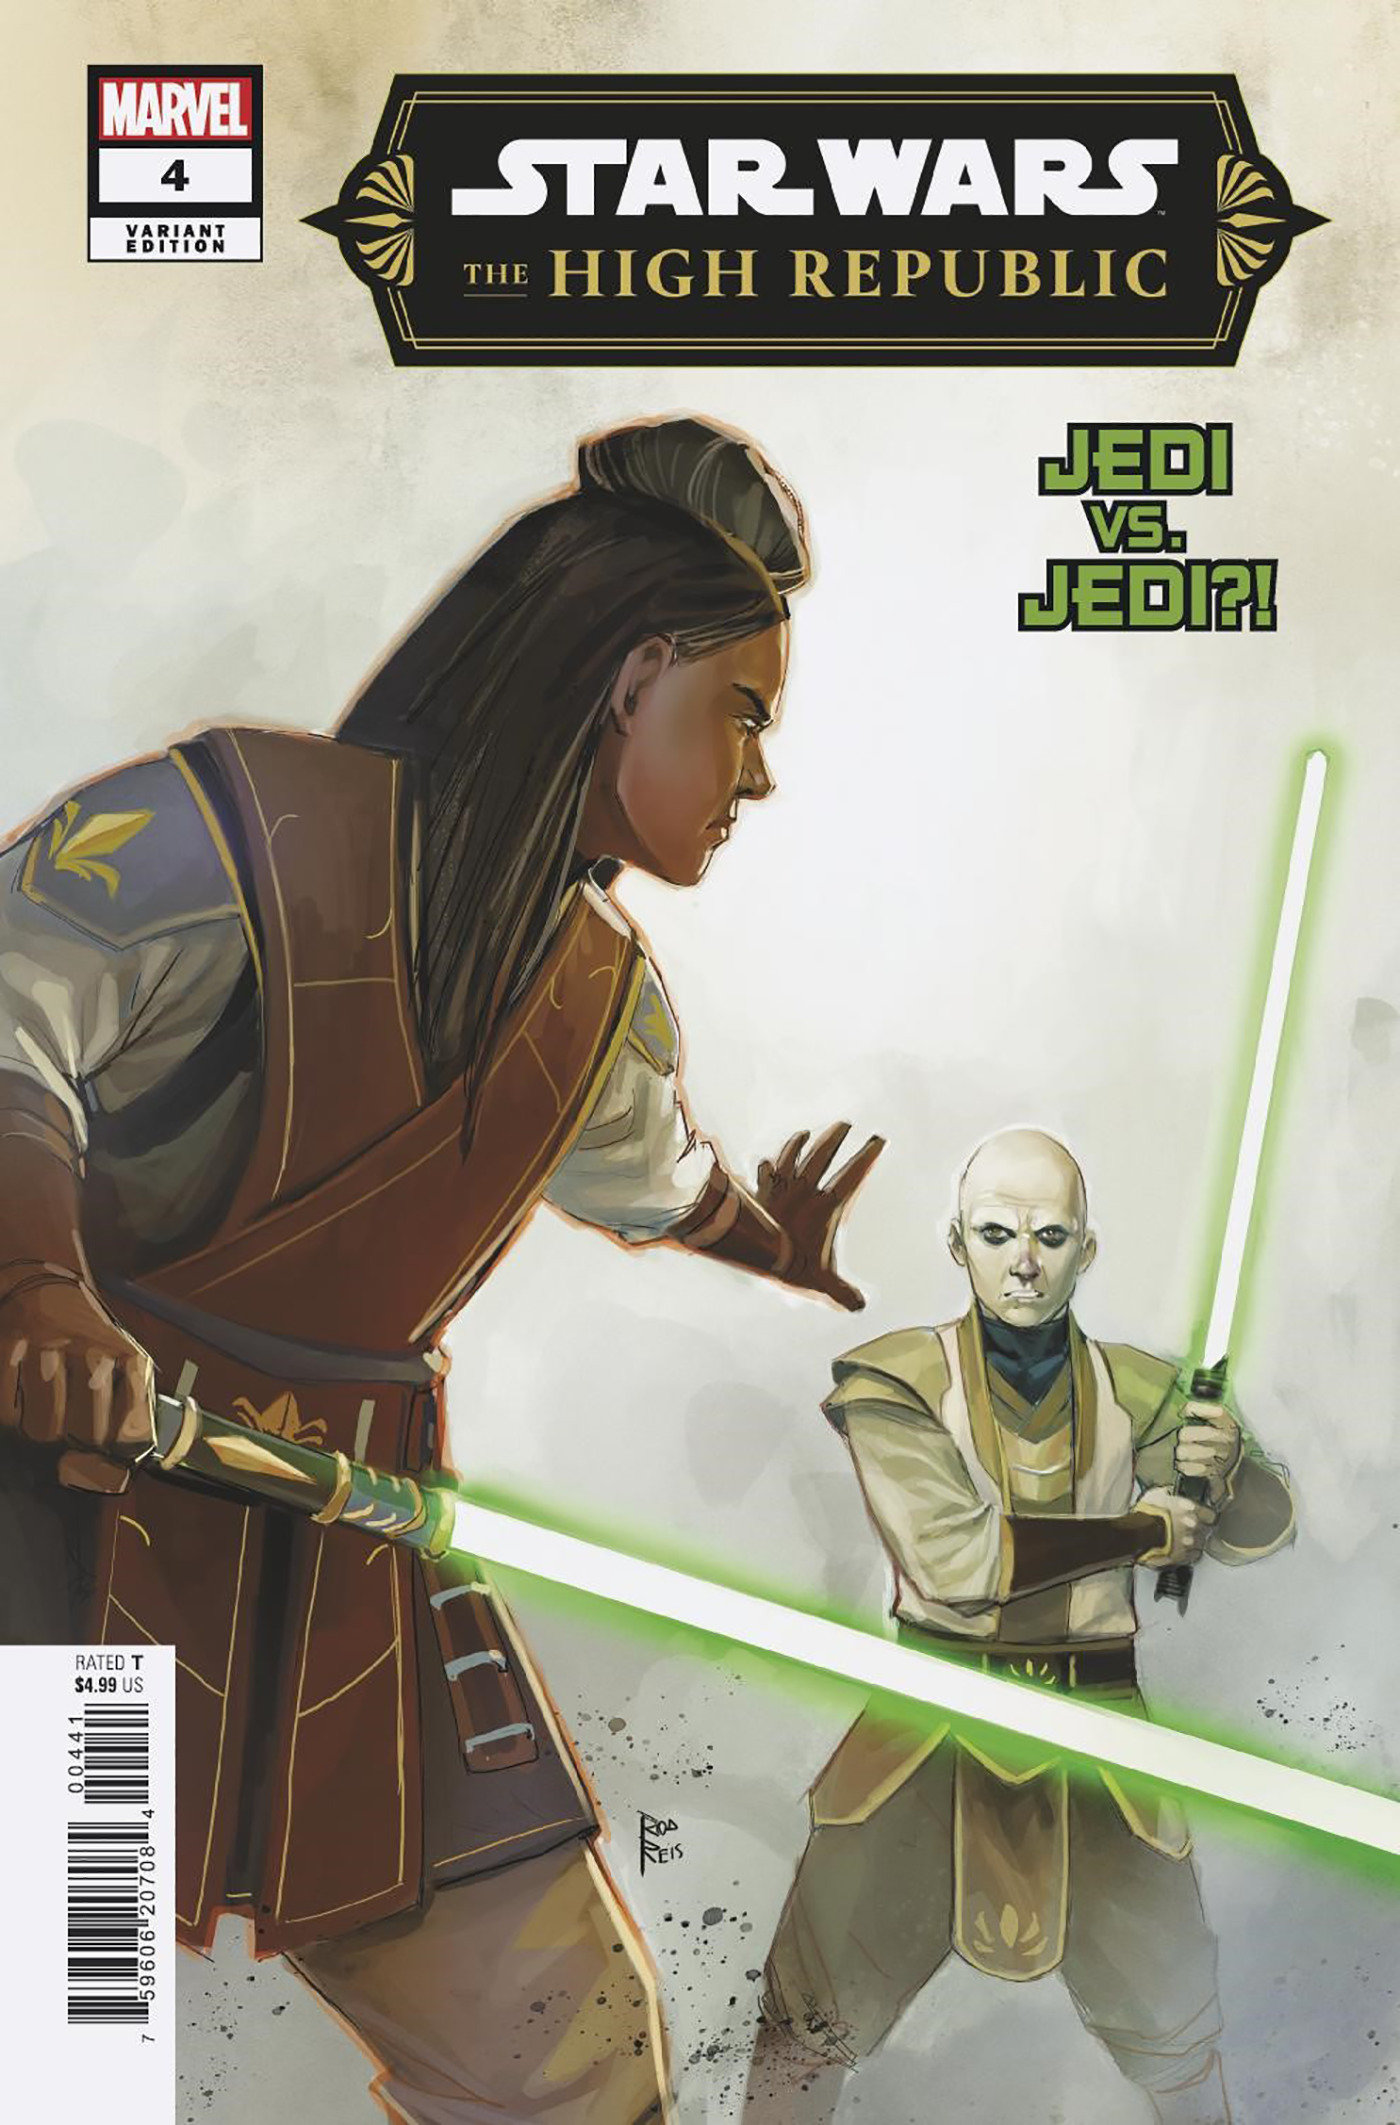 Star Wars: The High Republic (Phase III) #4 Rod Reis Variant